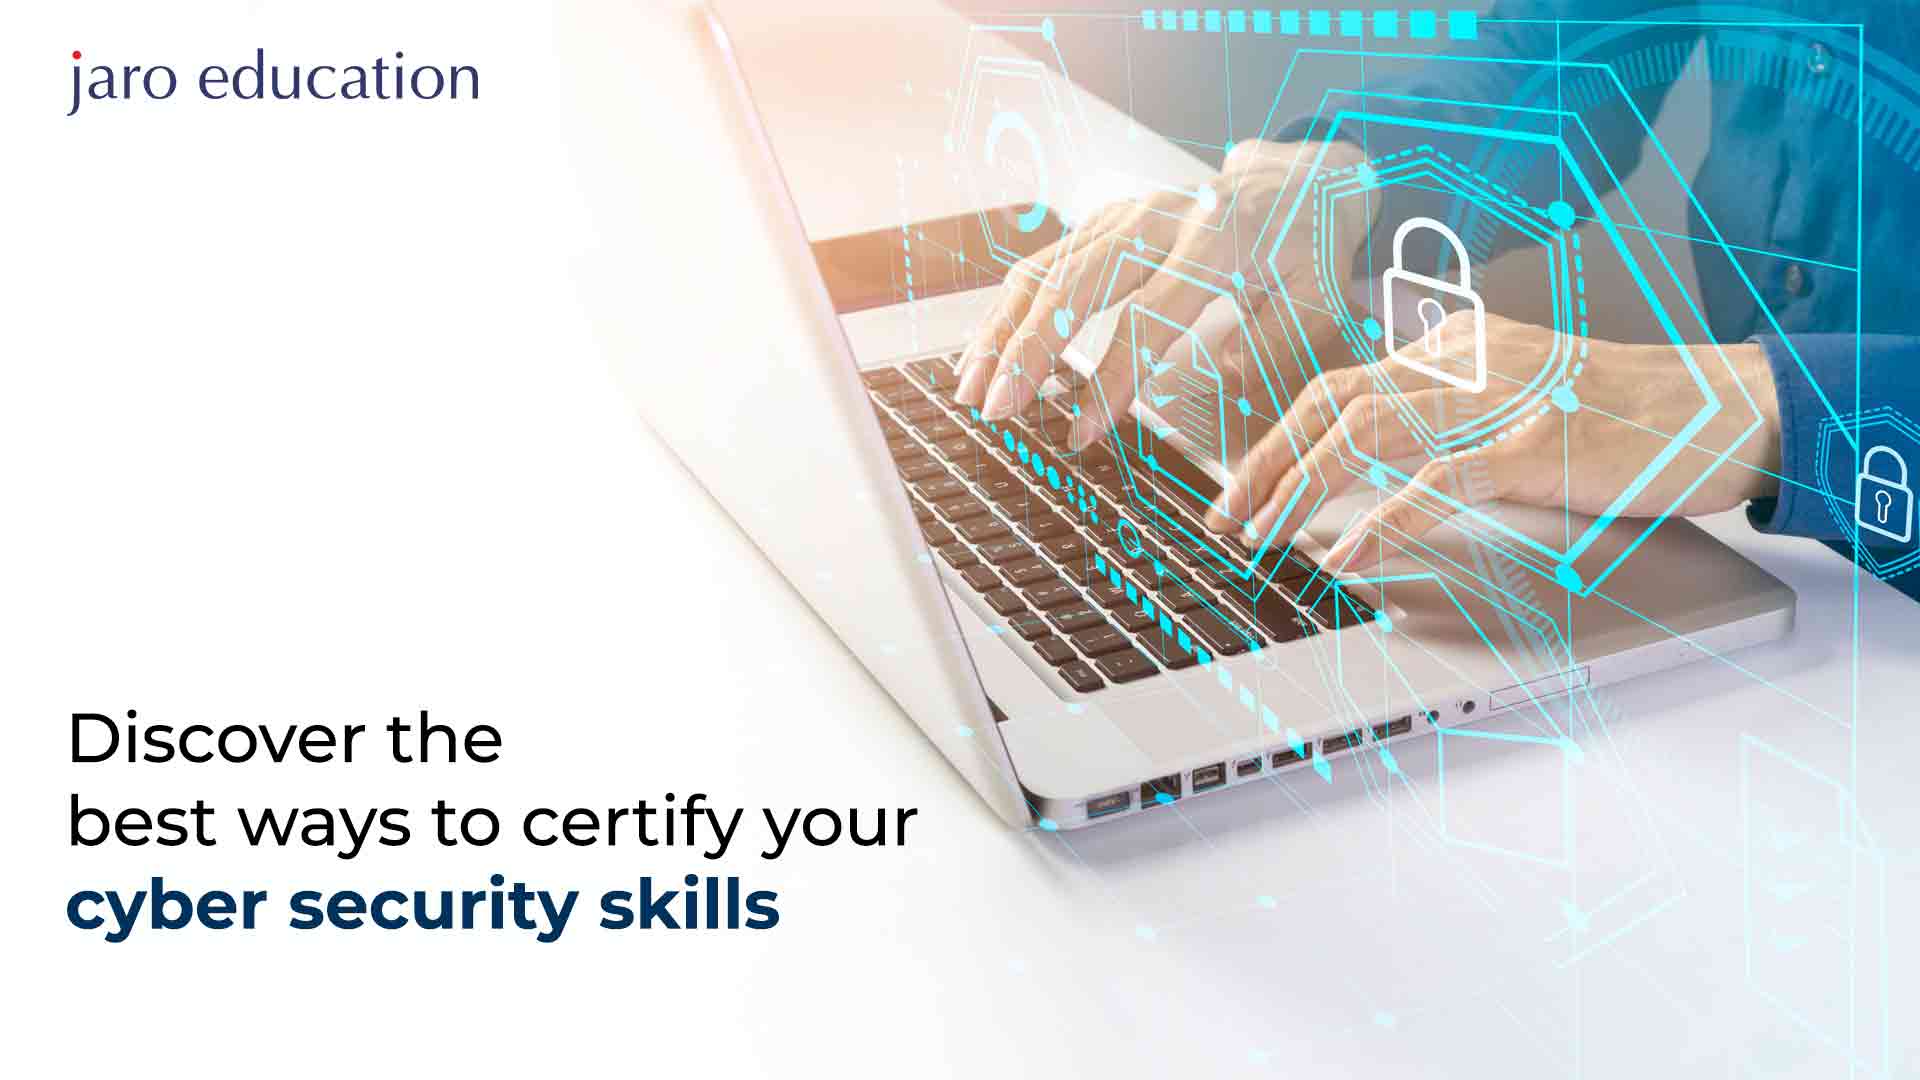 Discover-the-best-ways-to-certify-your-cyber-security-skills jaro